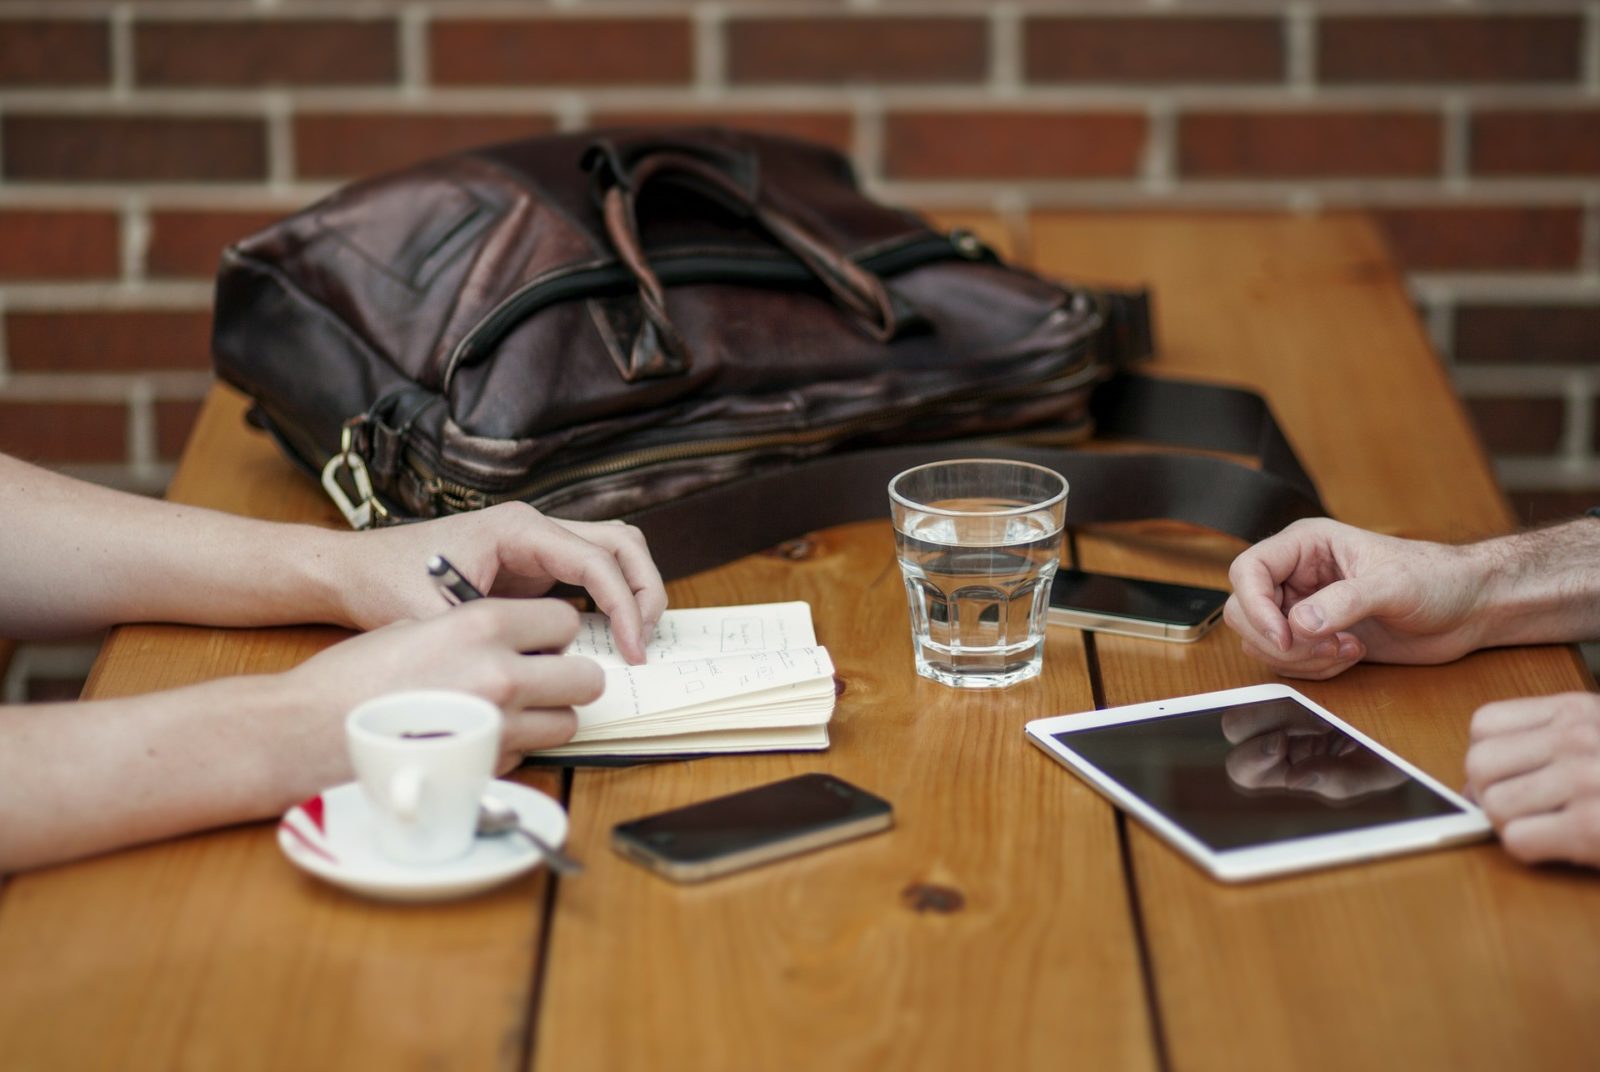 Two people sit opposite each other in a sales conversation at a table with drinks, mobile devices, a bag and a notebook arrayed on top.